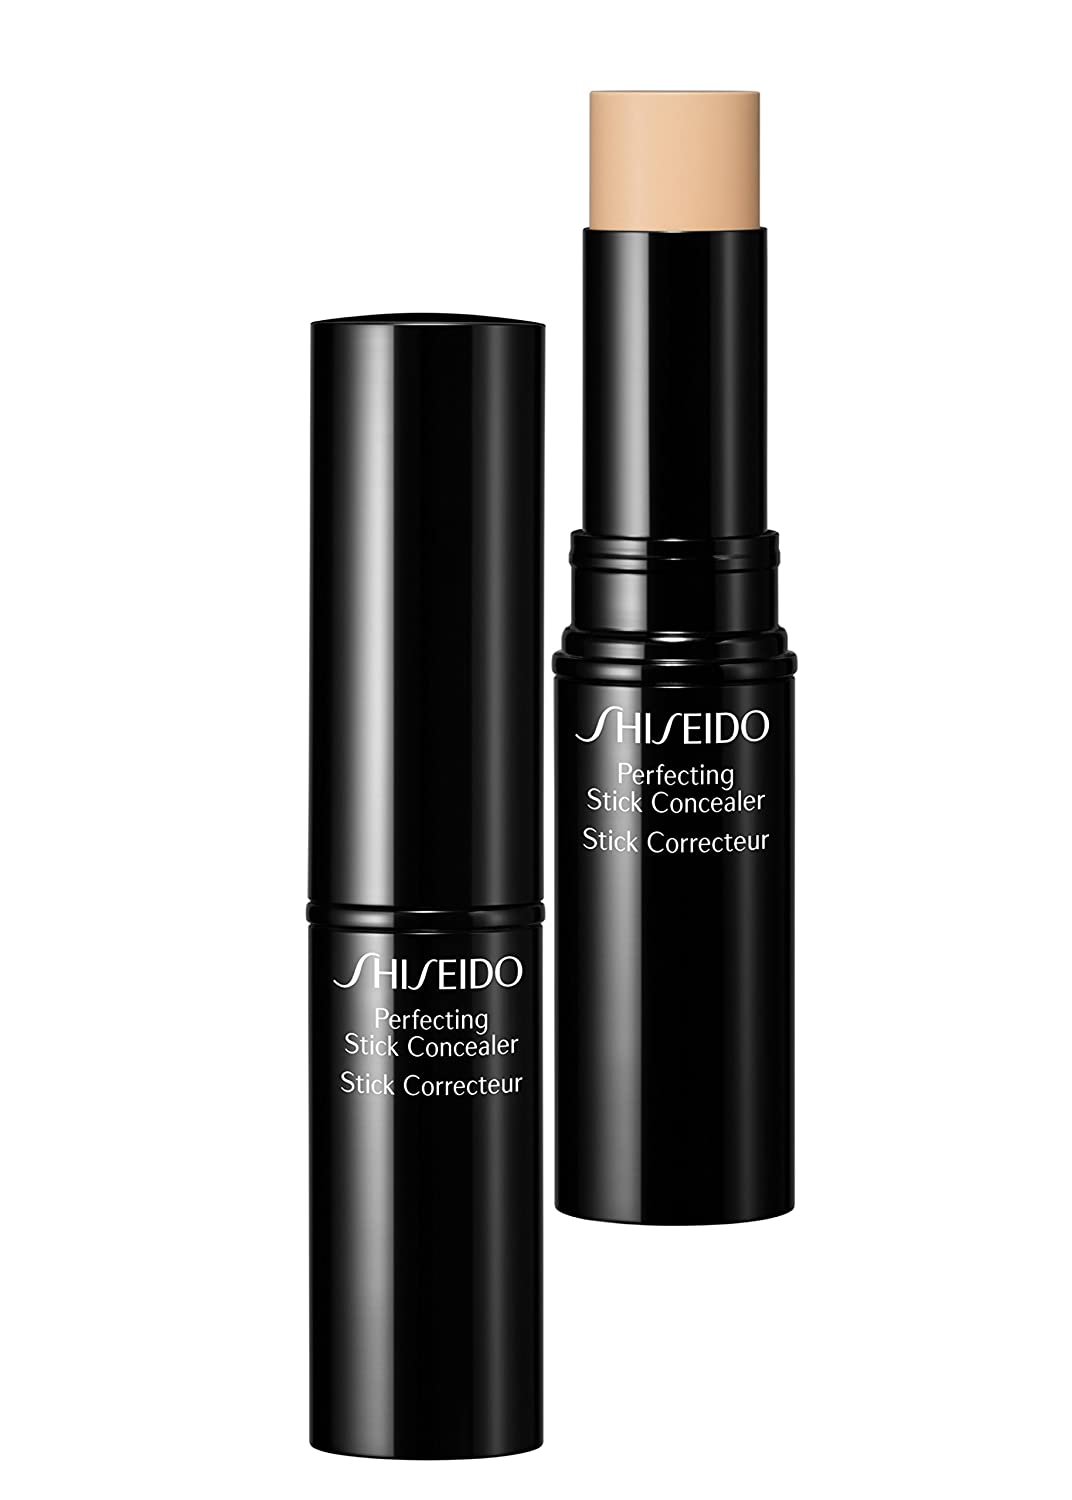 Shiseido Perfecting Stick Concealer Unisex Concealer 5 g Colour 33 Natural Pack of 1 x 0.026 kg, ‎farbe: